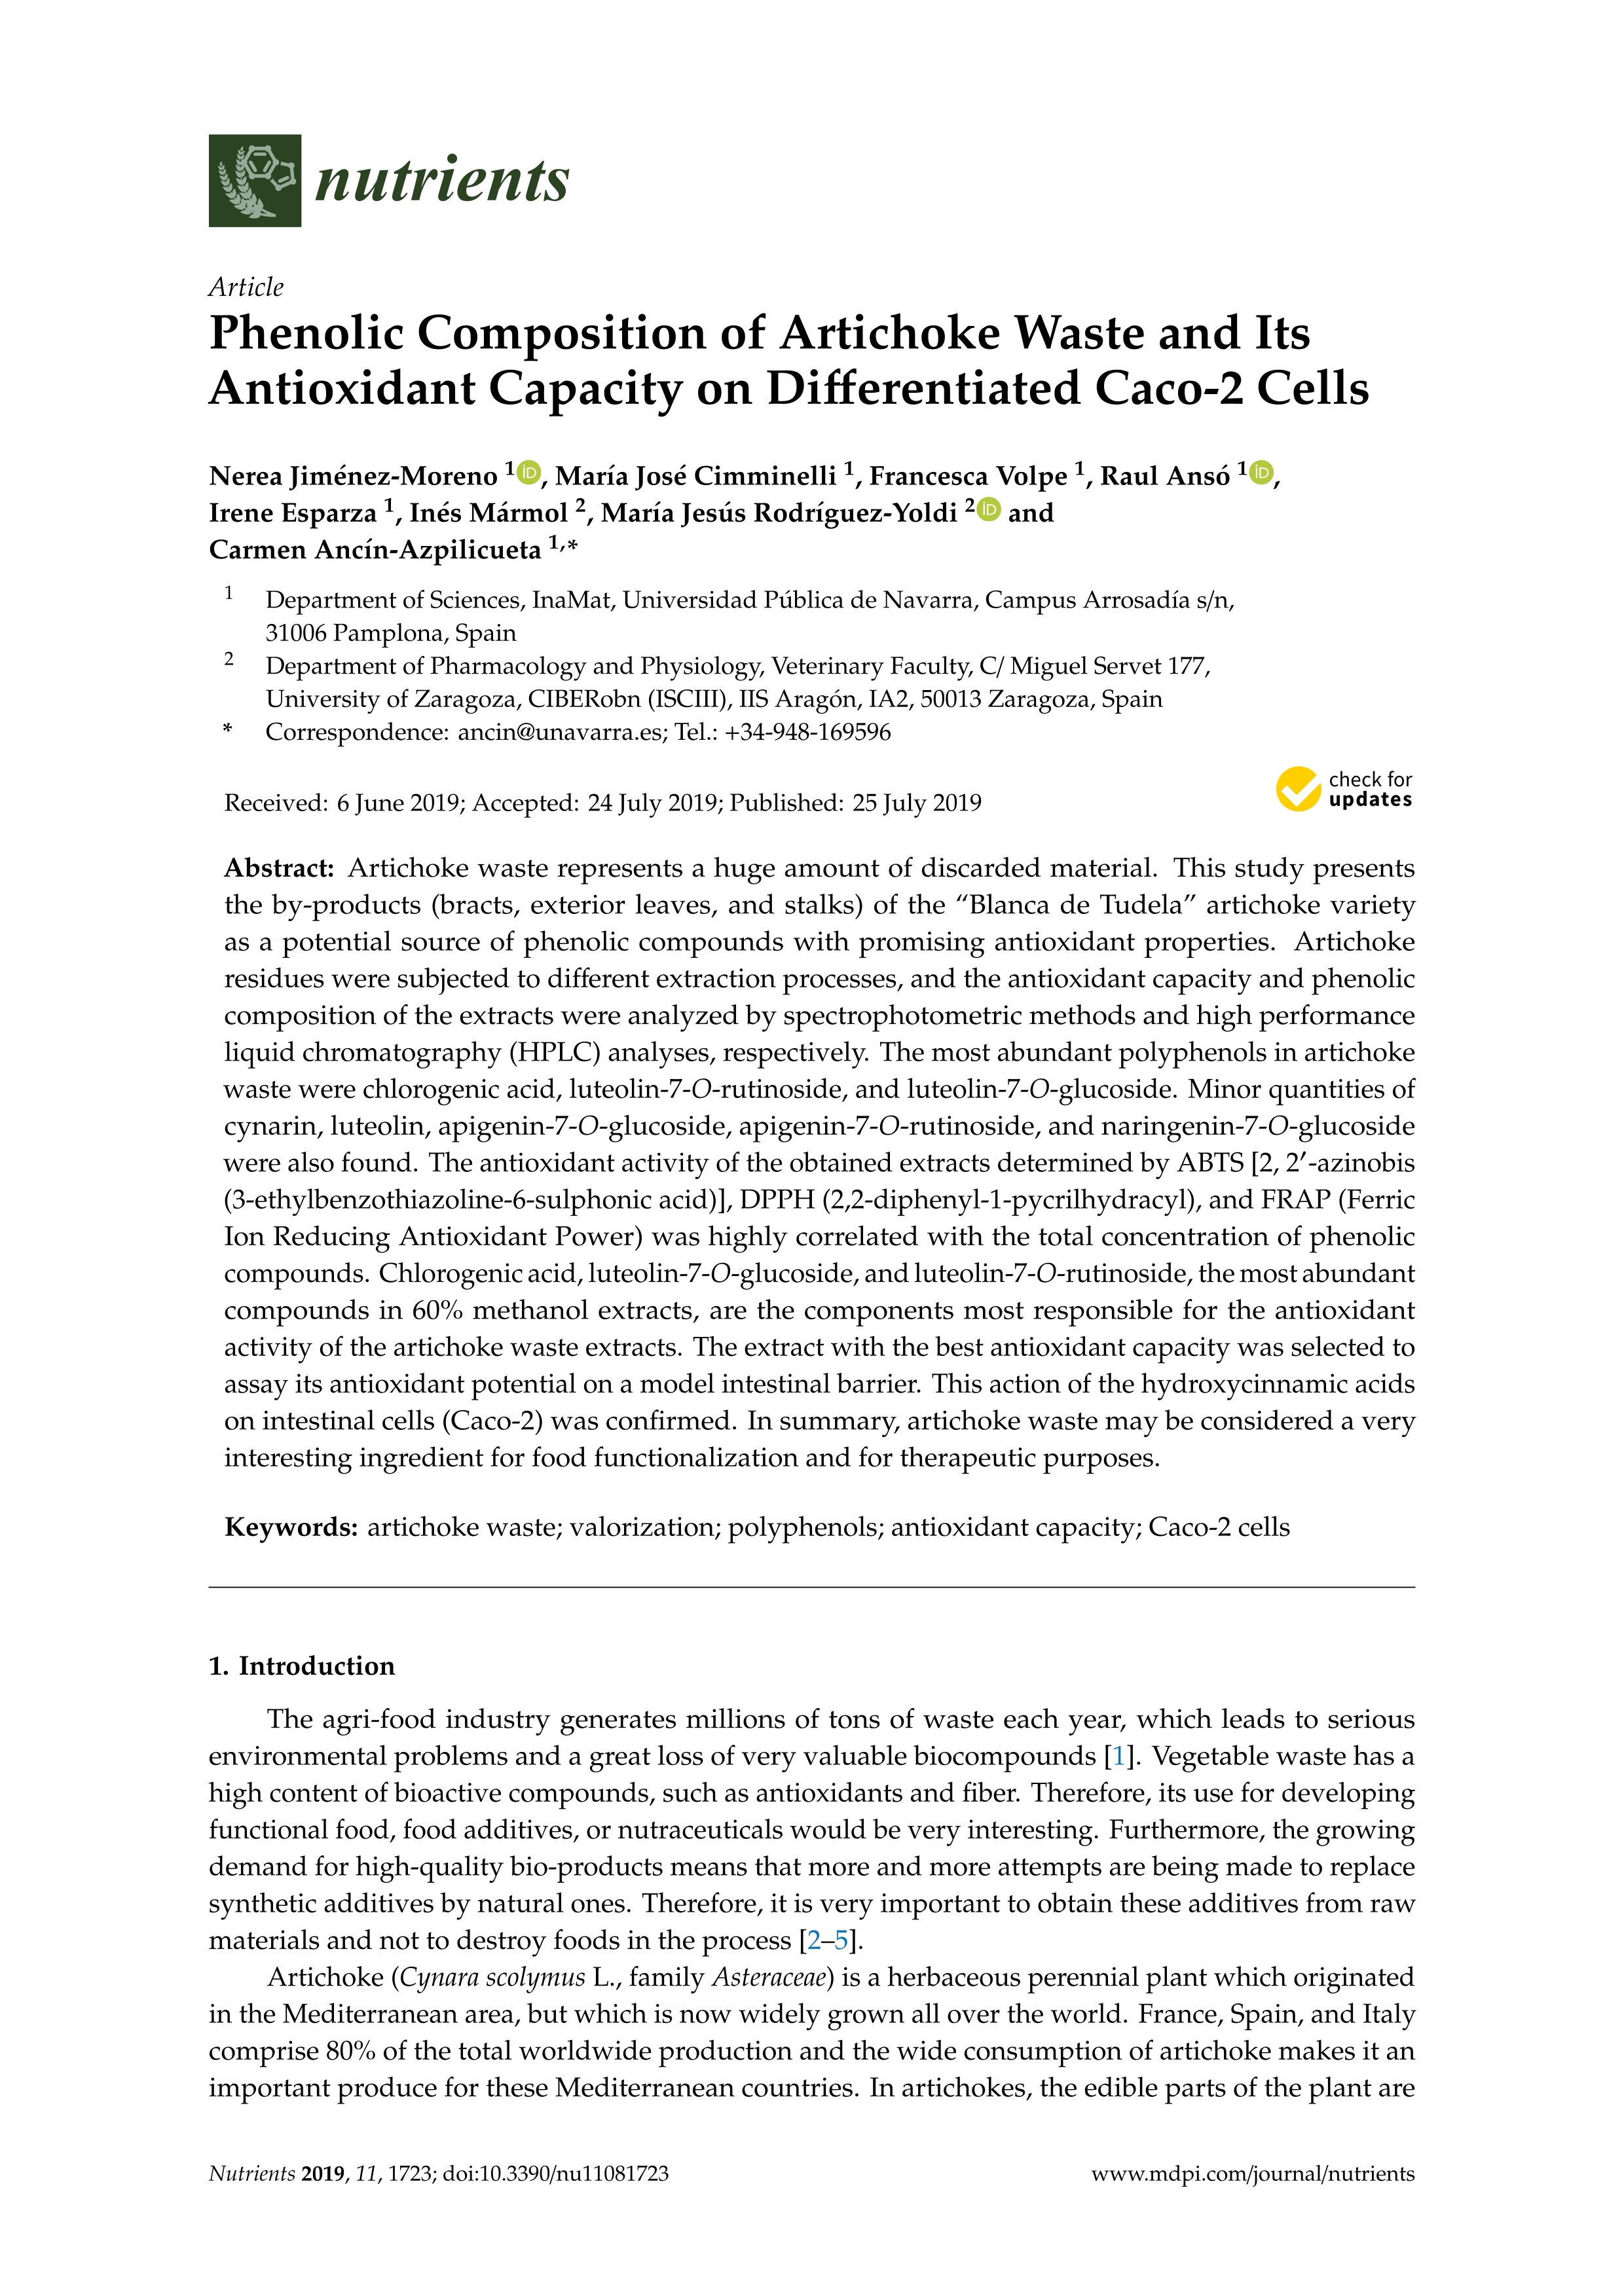 Phenolic composition of artichoke waste and its antioxidant capacity on differentiated Caco-2 cells